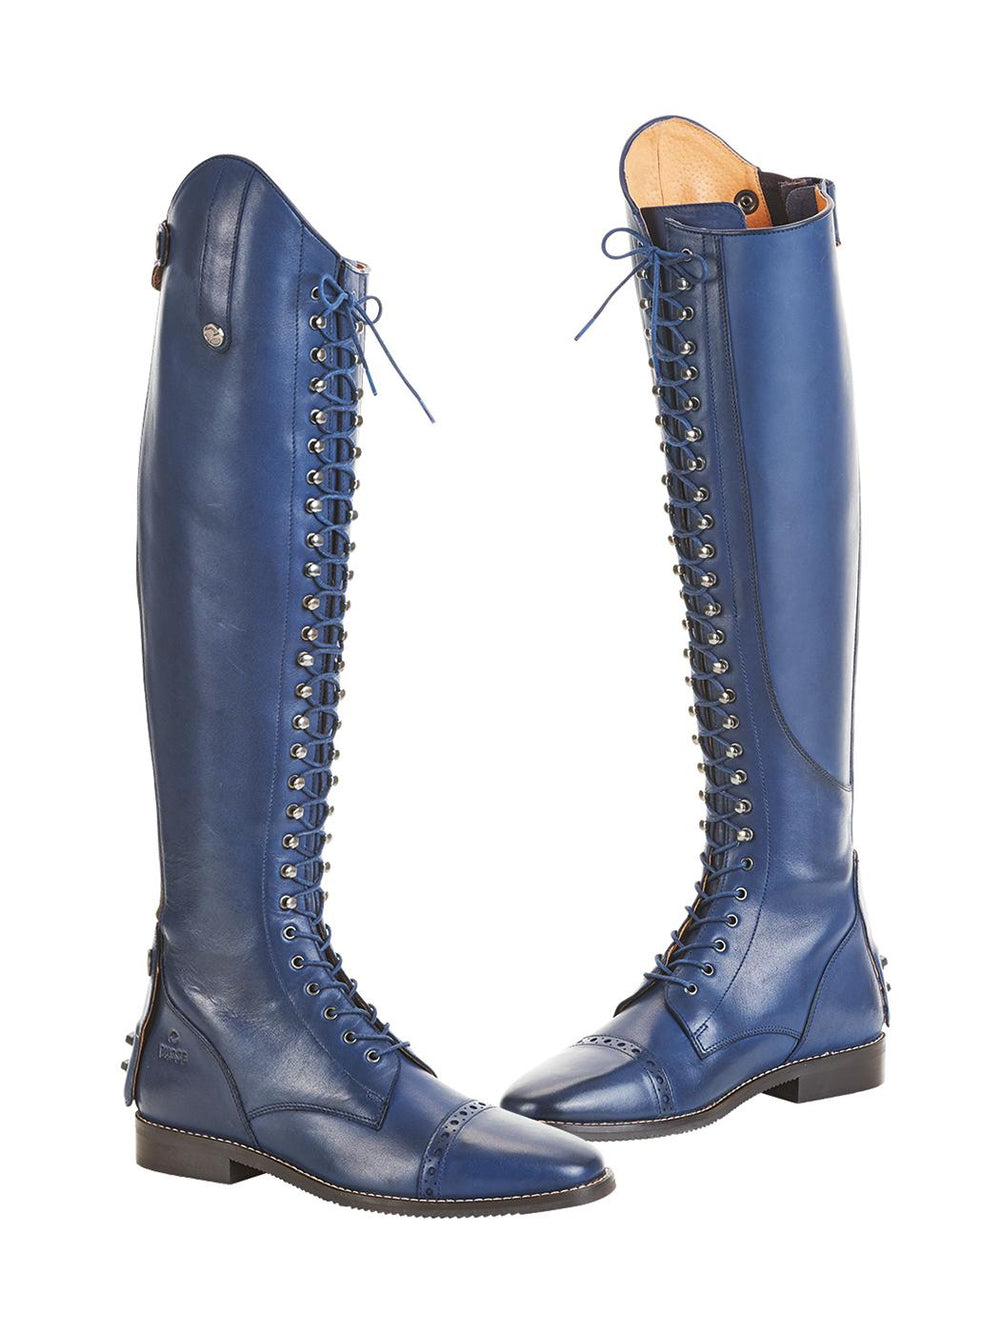 blue leather riding boots